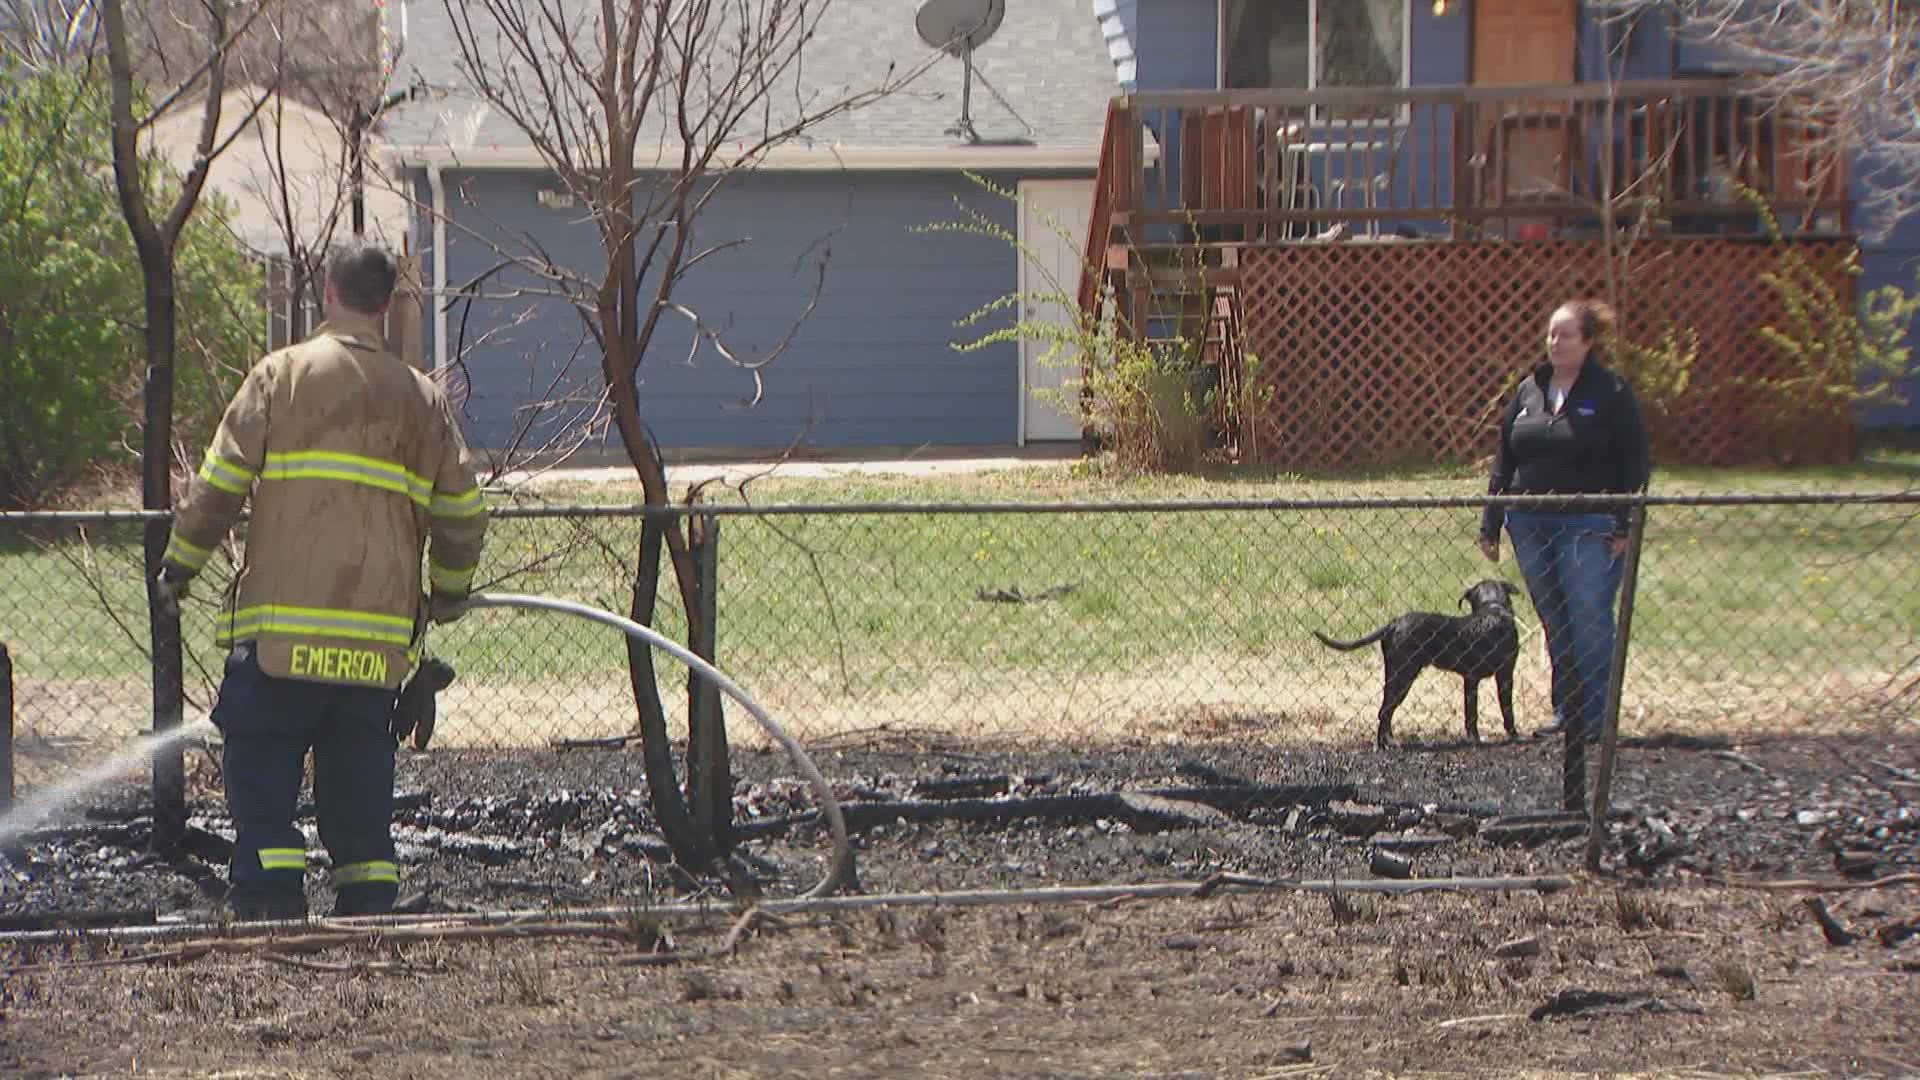 A small grass fire burned near homes near Arvada. 9news reporter Noel Brennan is live from the scene.